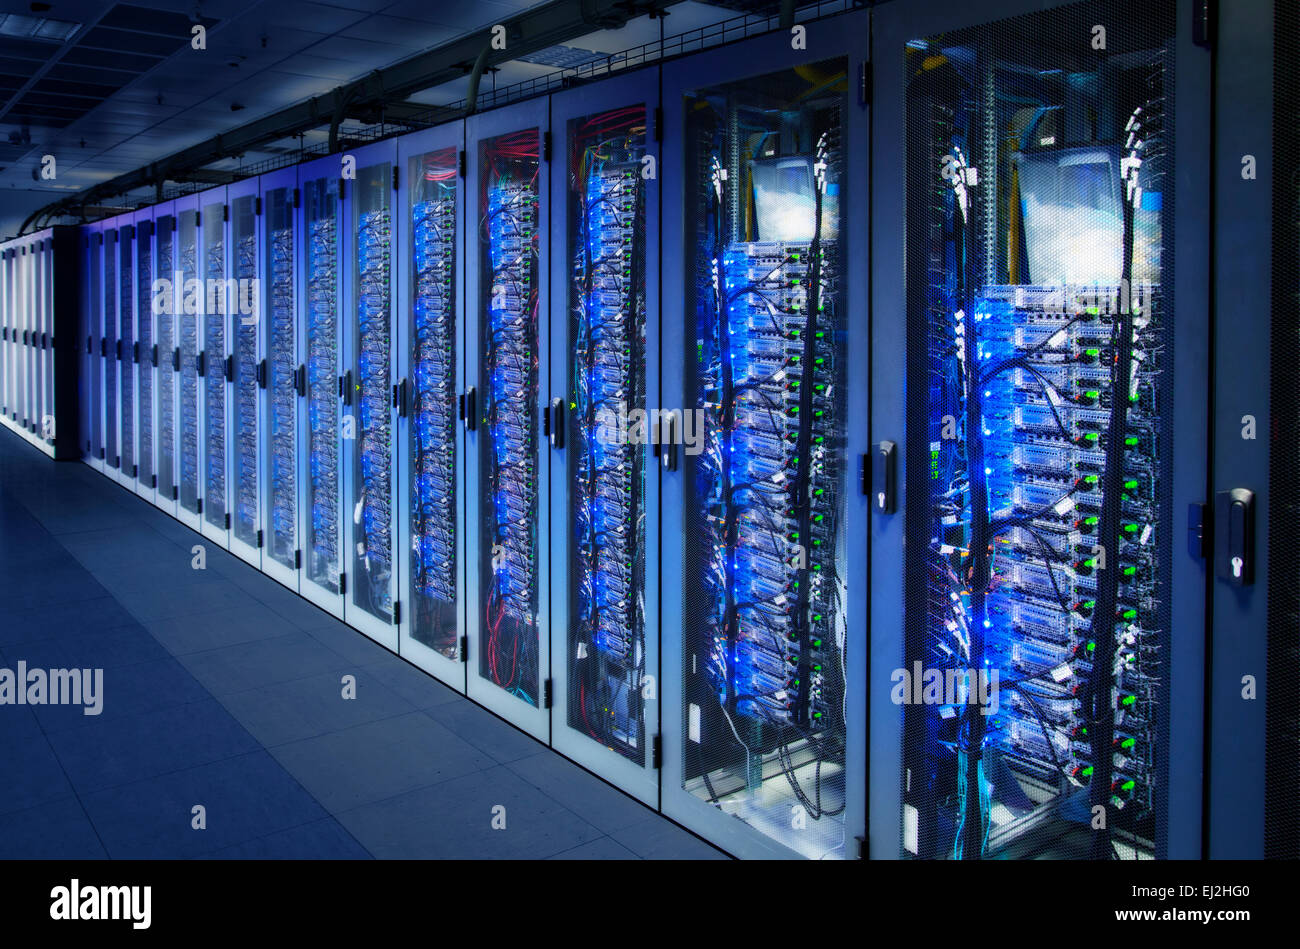 Network cabinets with server racks in a data center. Digital Composite (DC) Stock Photo